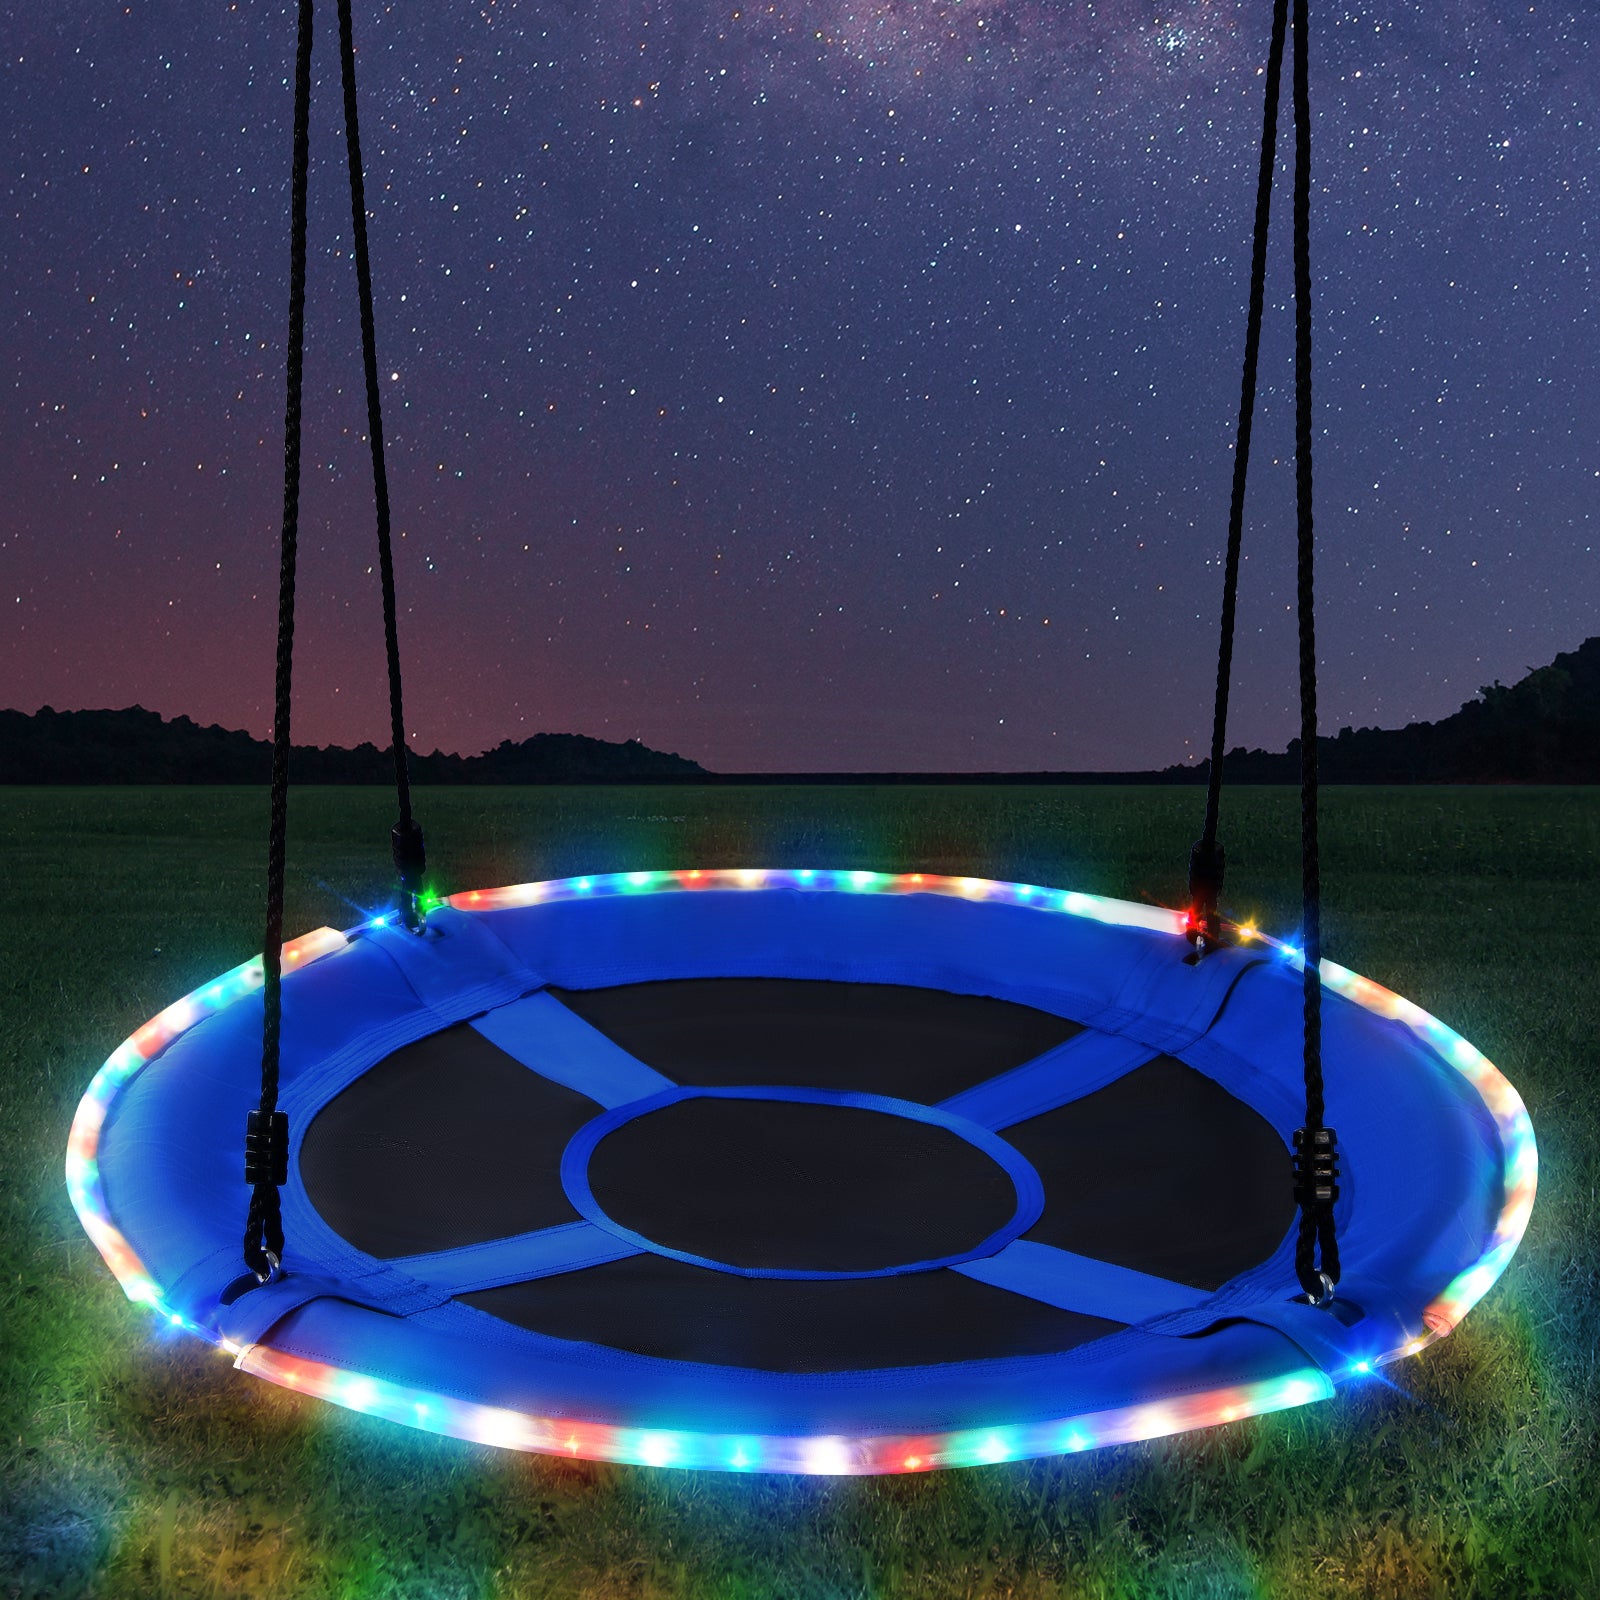 Trekassy 700lbs 40” Saucer Tree Swing with LED Lights for Kids Adults Outdoor-Blue